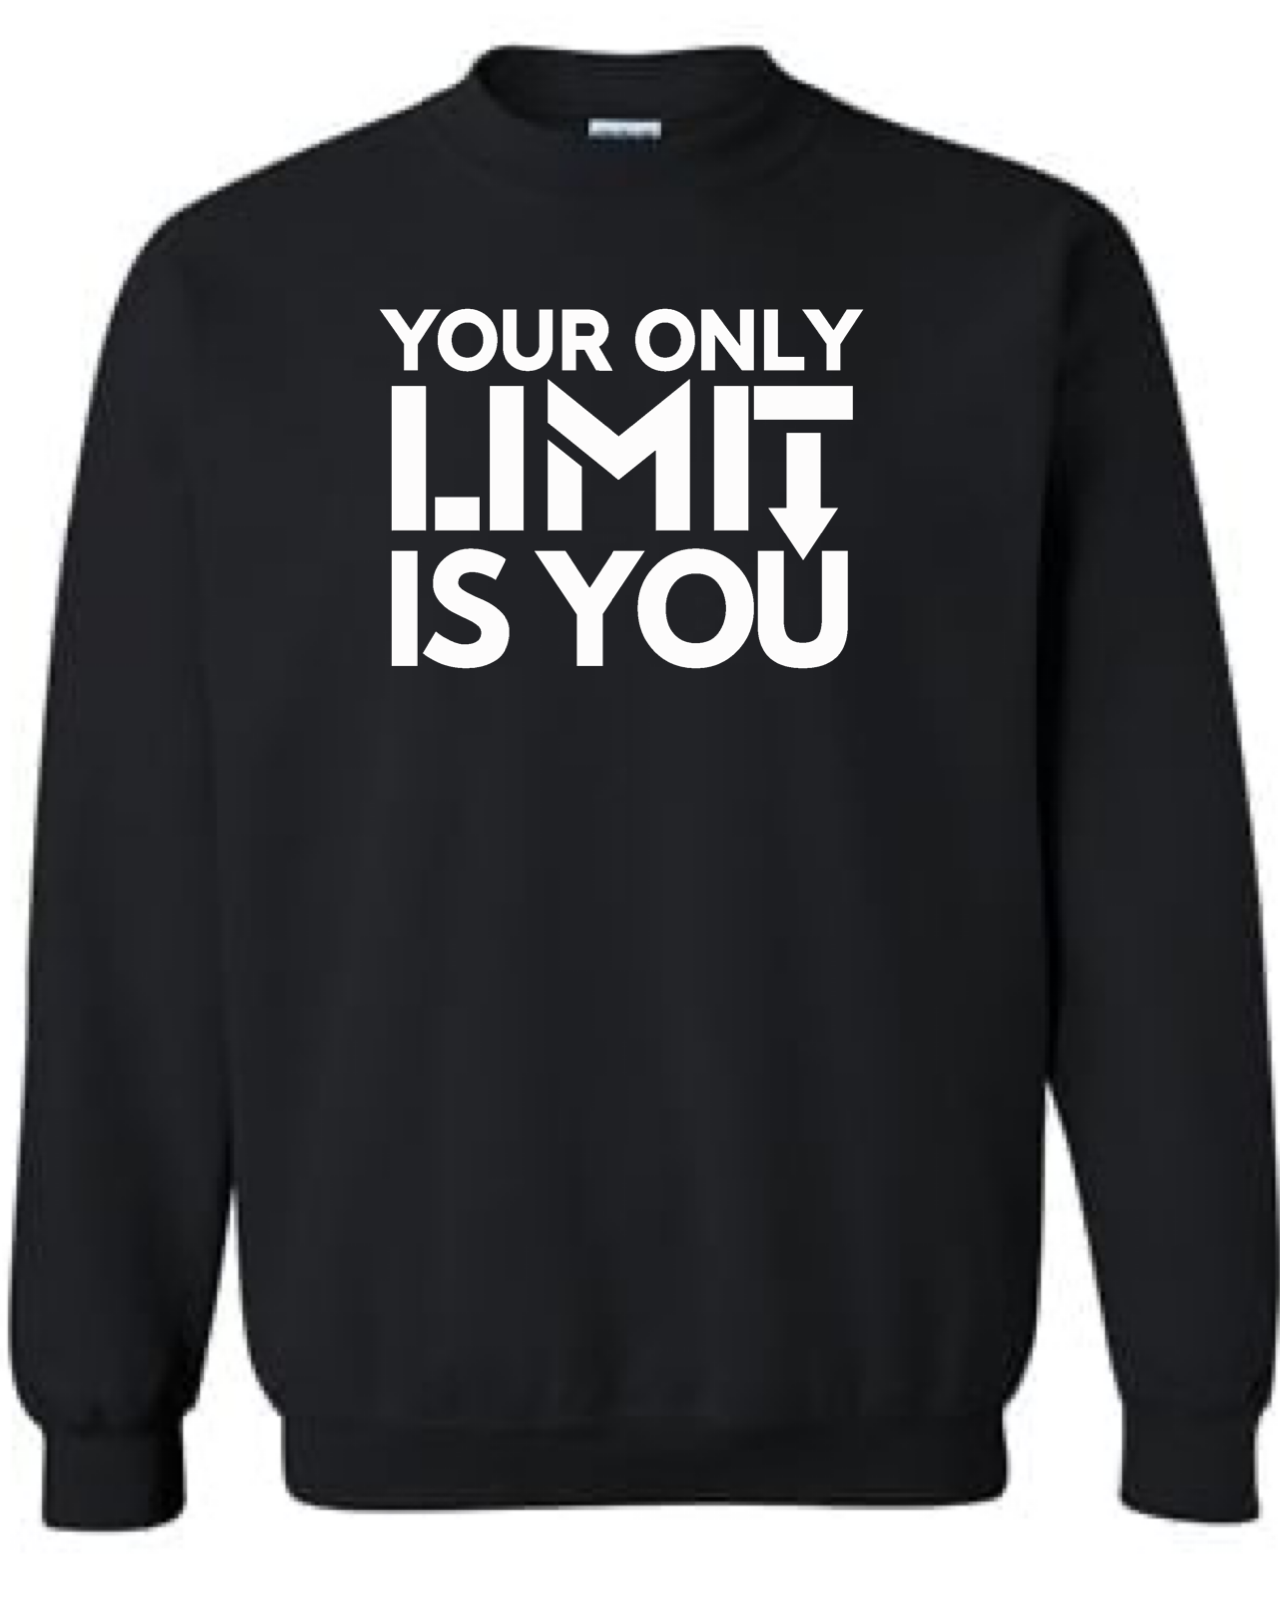 Your Only Limit is You Crewneck Sweatshirt